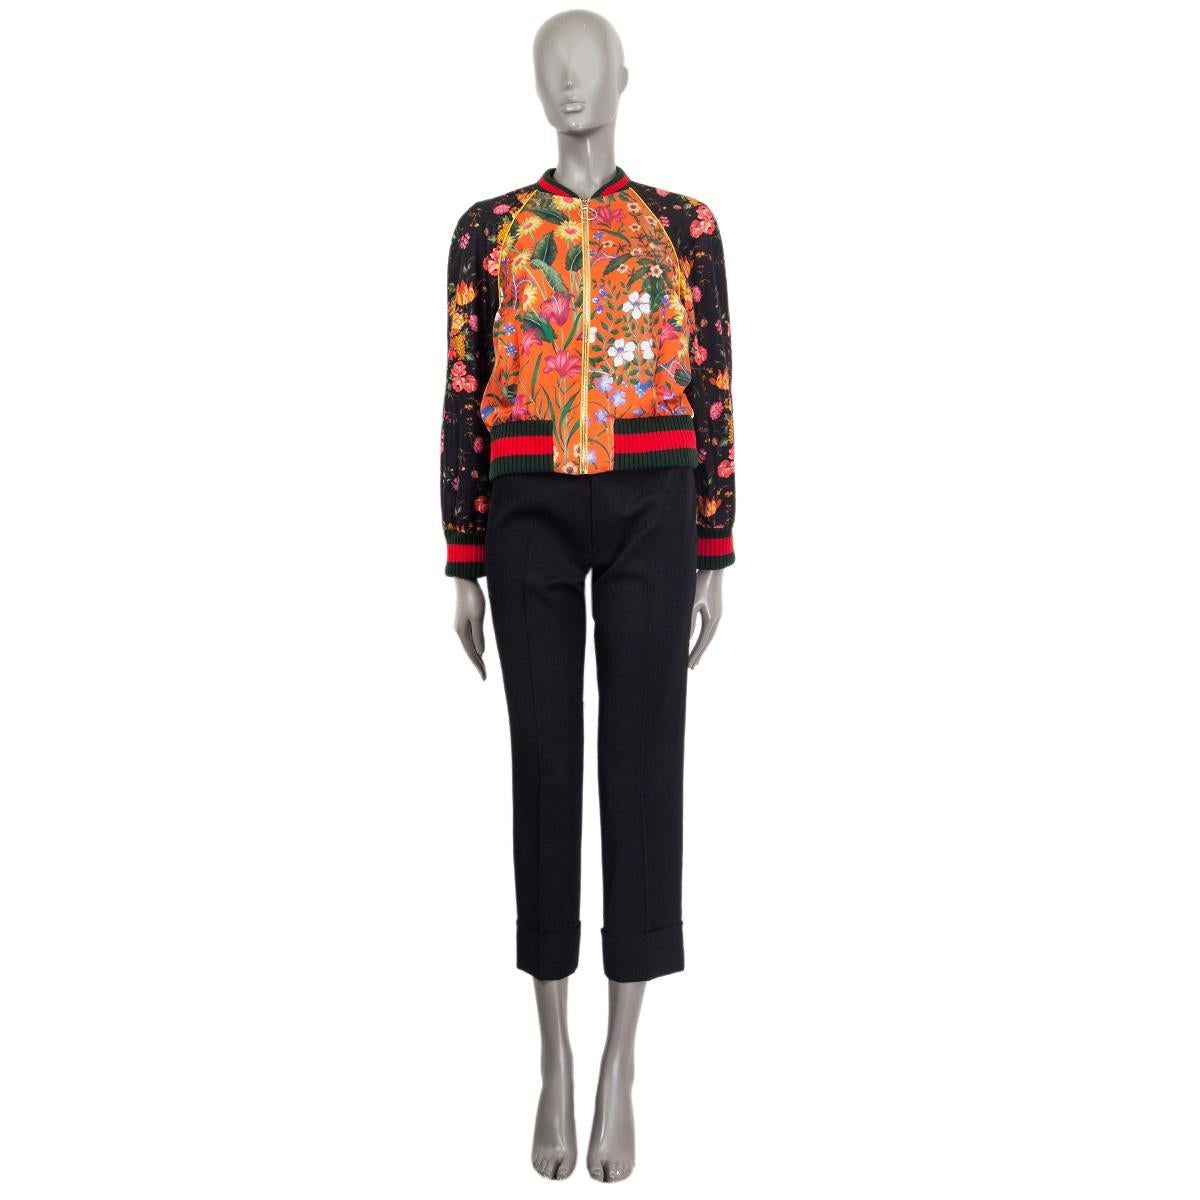 100% authentic Gucci 'Loved Panther' bomber jacket in black, pink, green, red, orange, creme silk (100%) with raglan sleeves (sleeve measurements taken from the neck). Duchesse rib knit trim in green and red along the neck, cuffs and bottom hem.